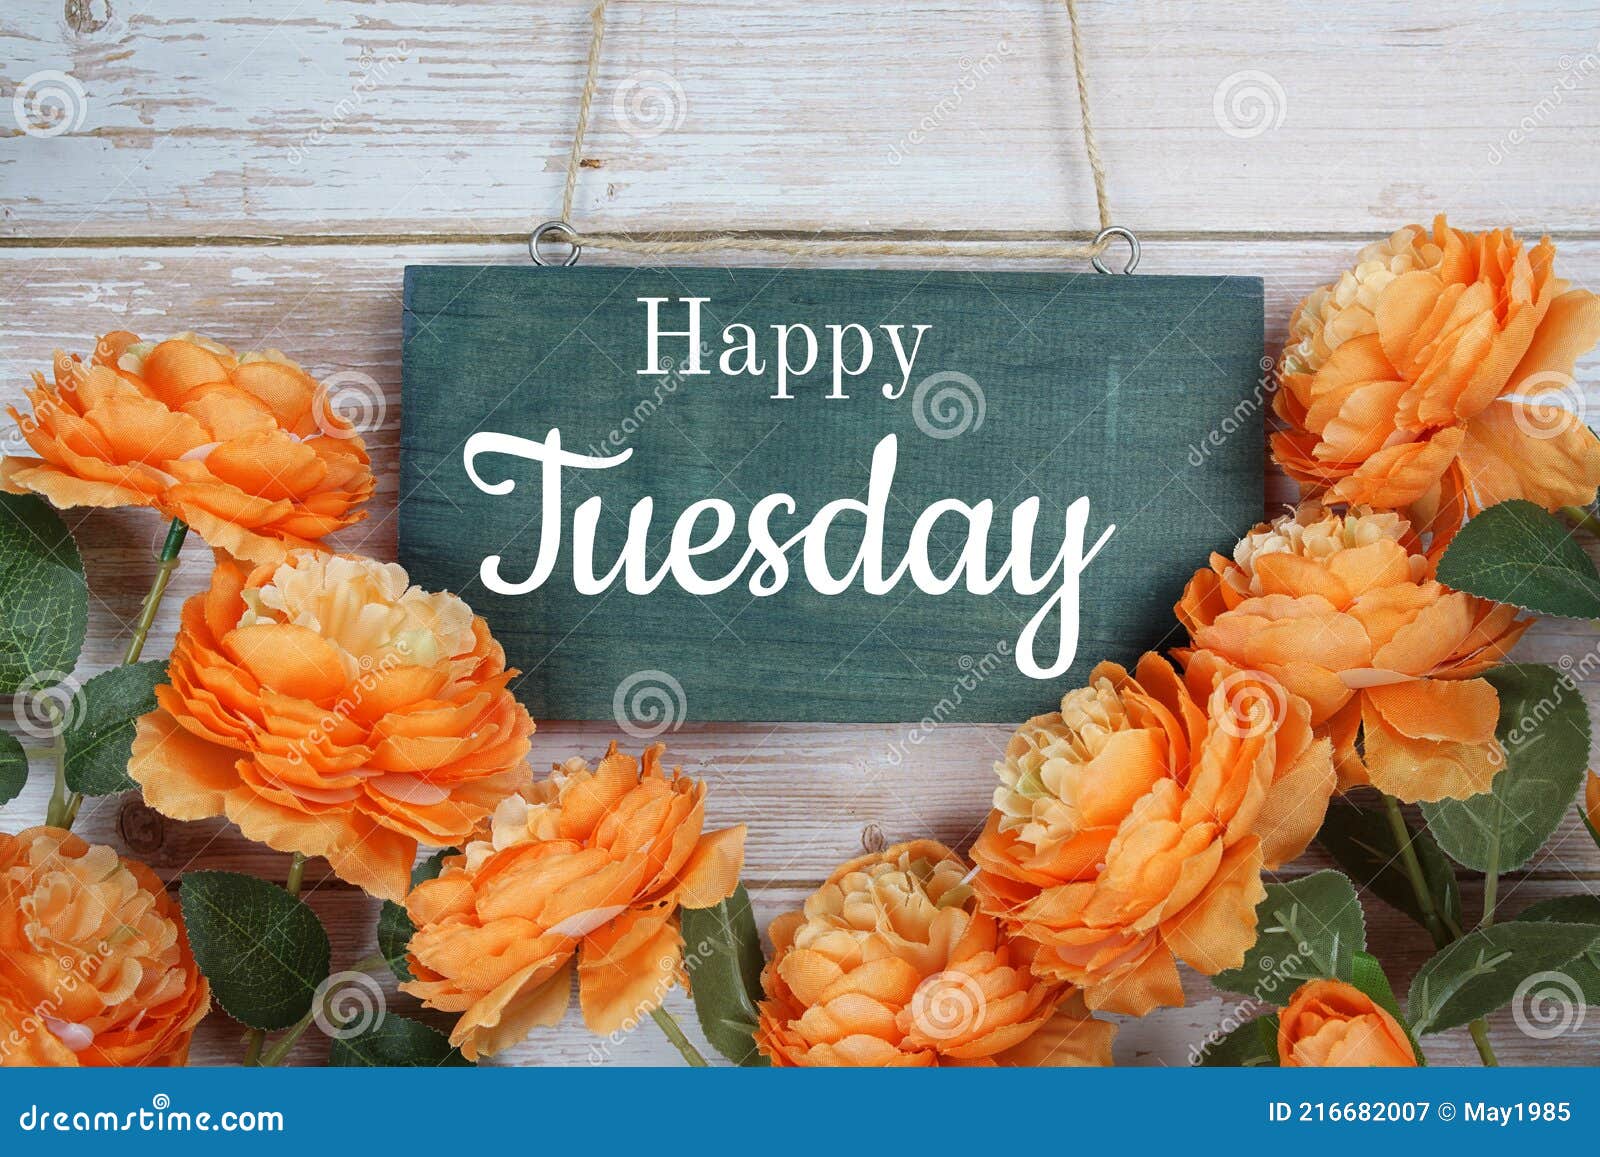 Happy Tuesday Text with Flower Decoration on Wooden Background Stock